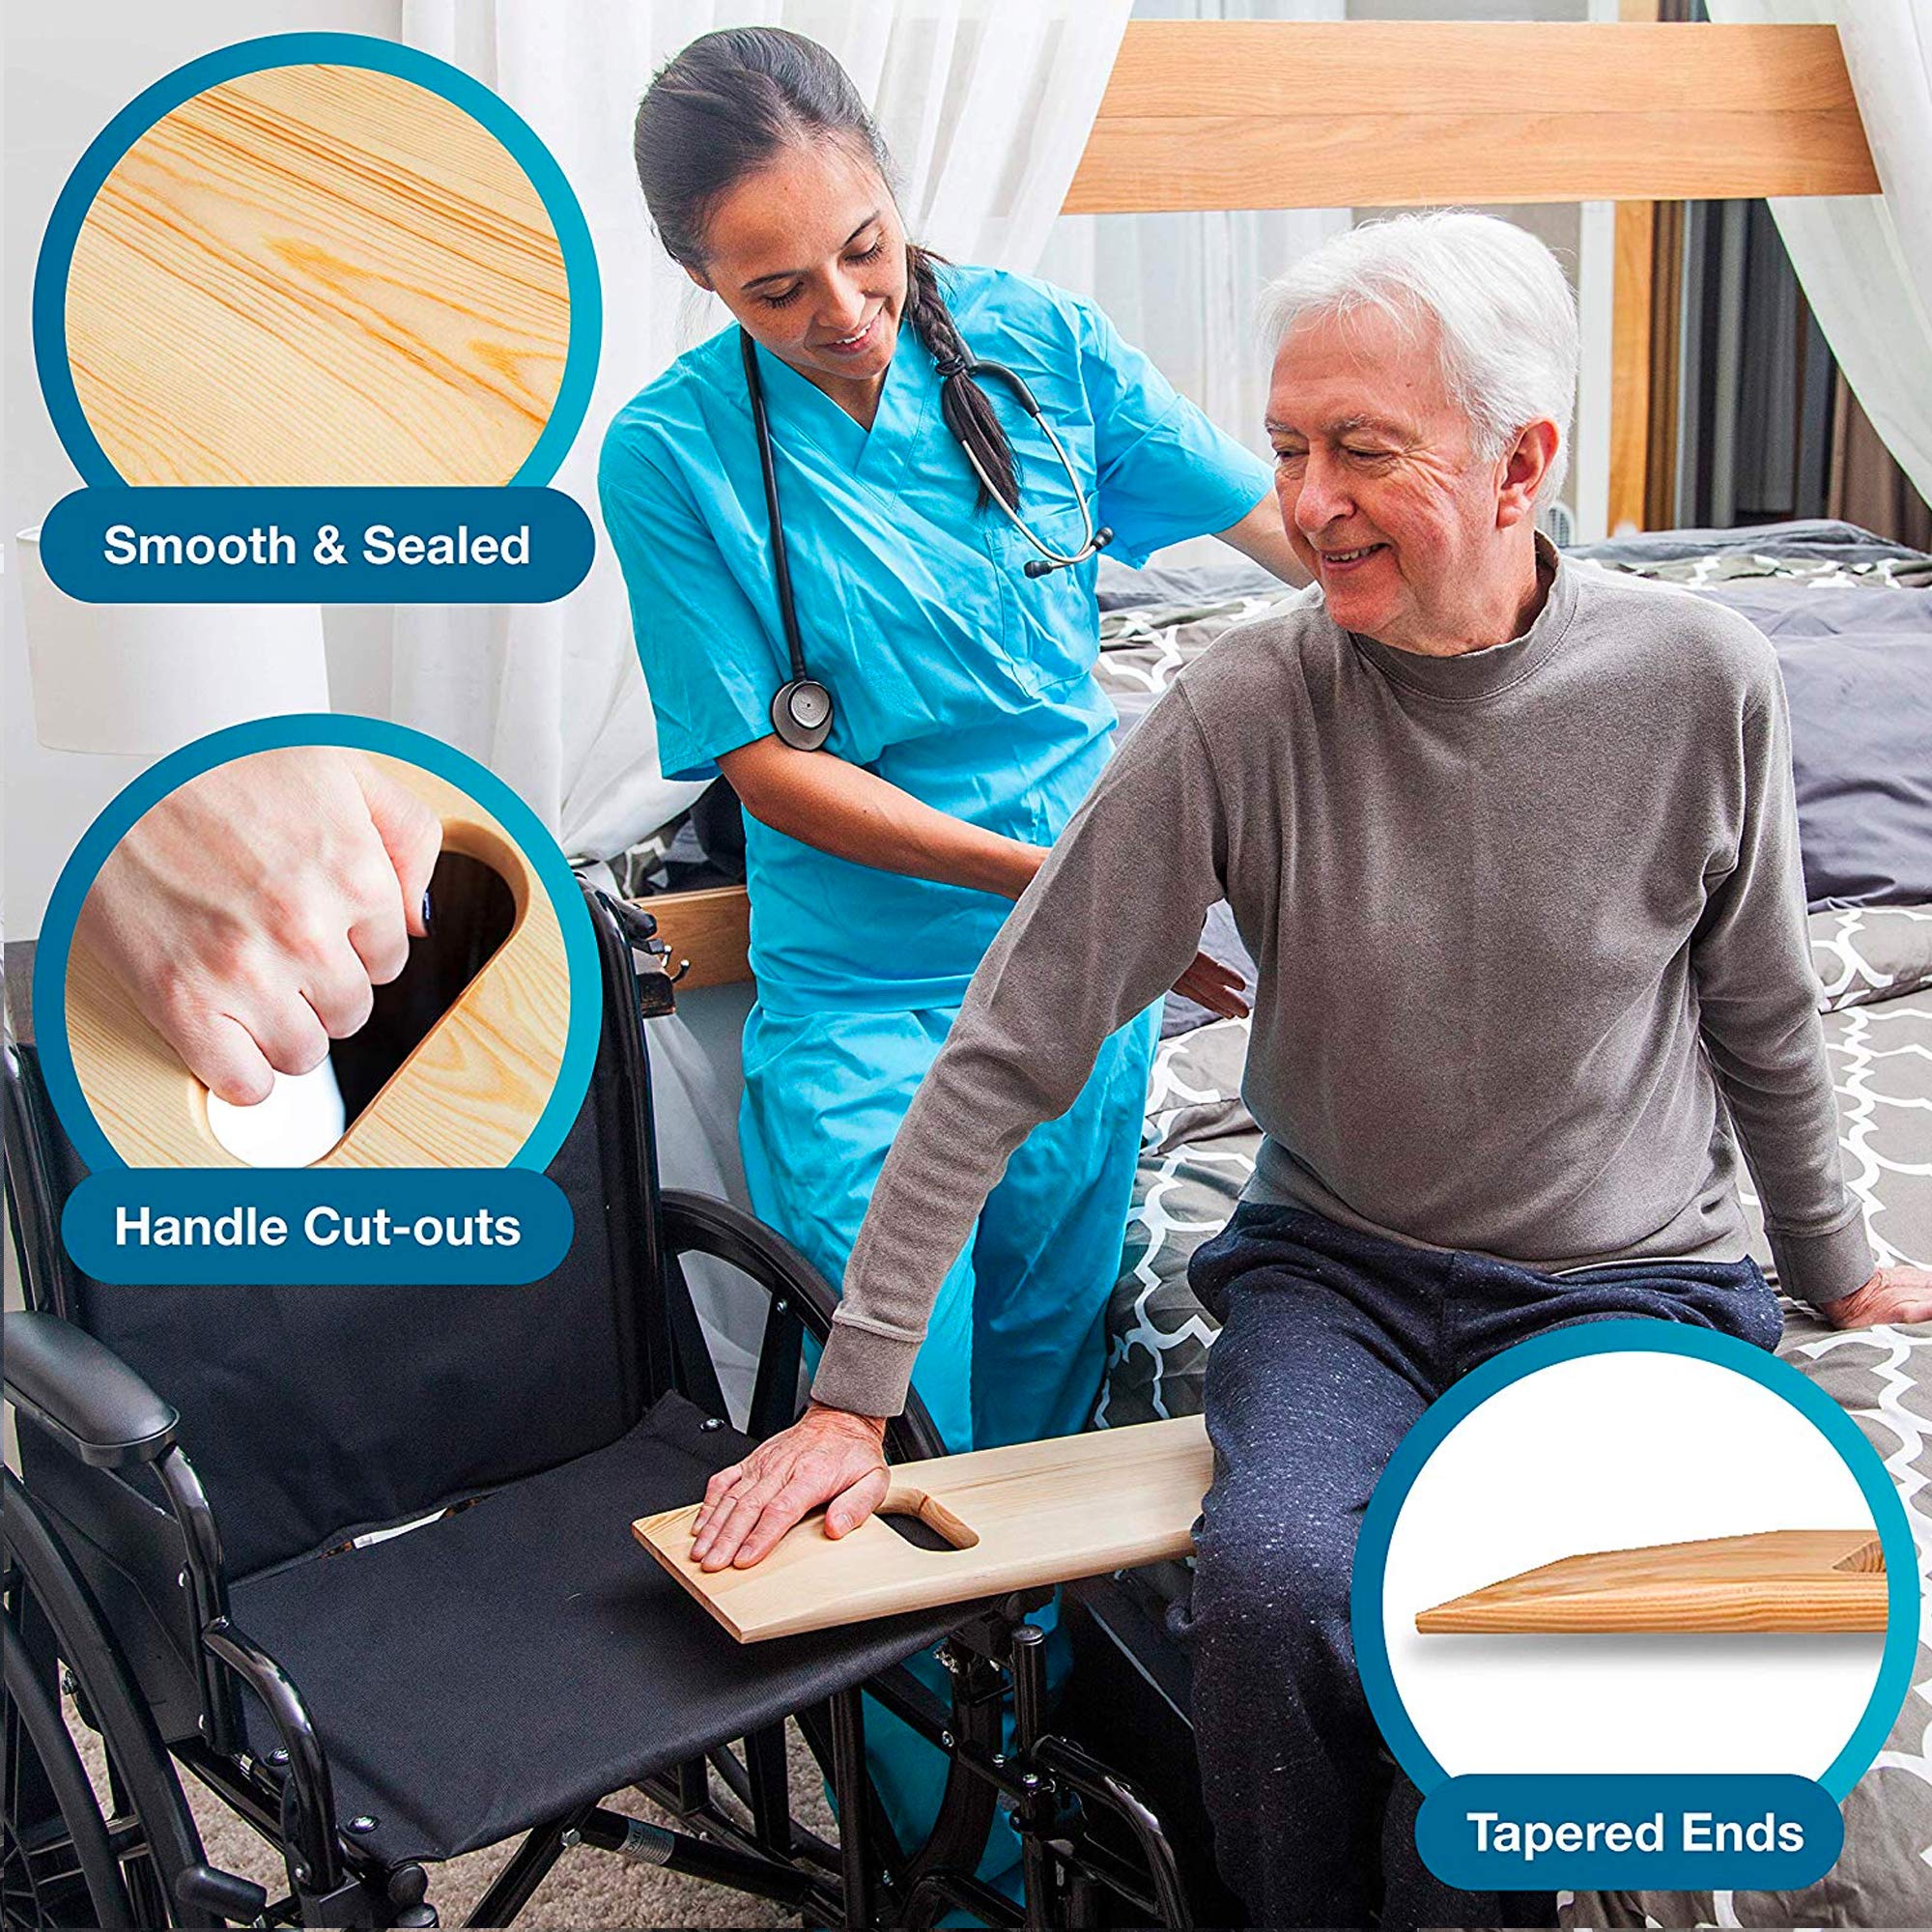 DMI Transfer Board and Slide Board made of Heavy-Duty Wood for Patient, Senior and Handicap Move Assist and Slide Transfers, Holds up to 440 Pounds, 1 Cut out Handle, 30 x 8 x .75